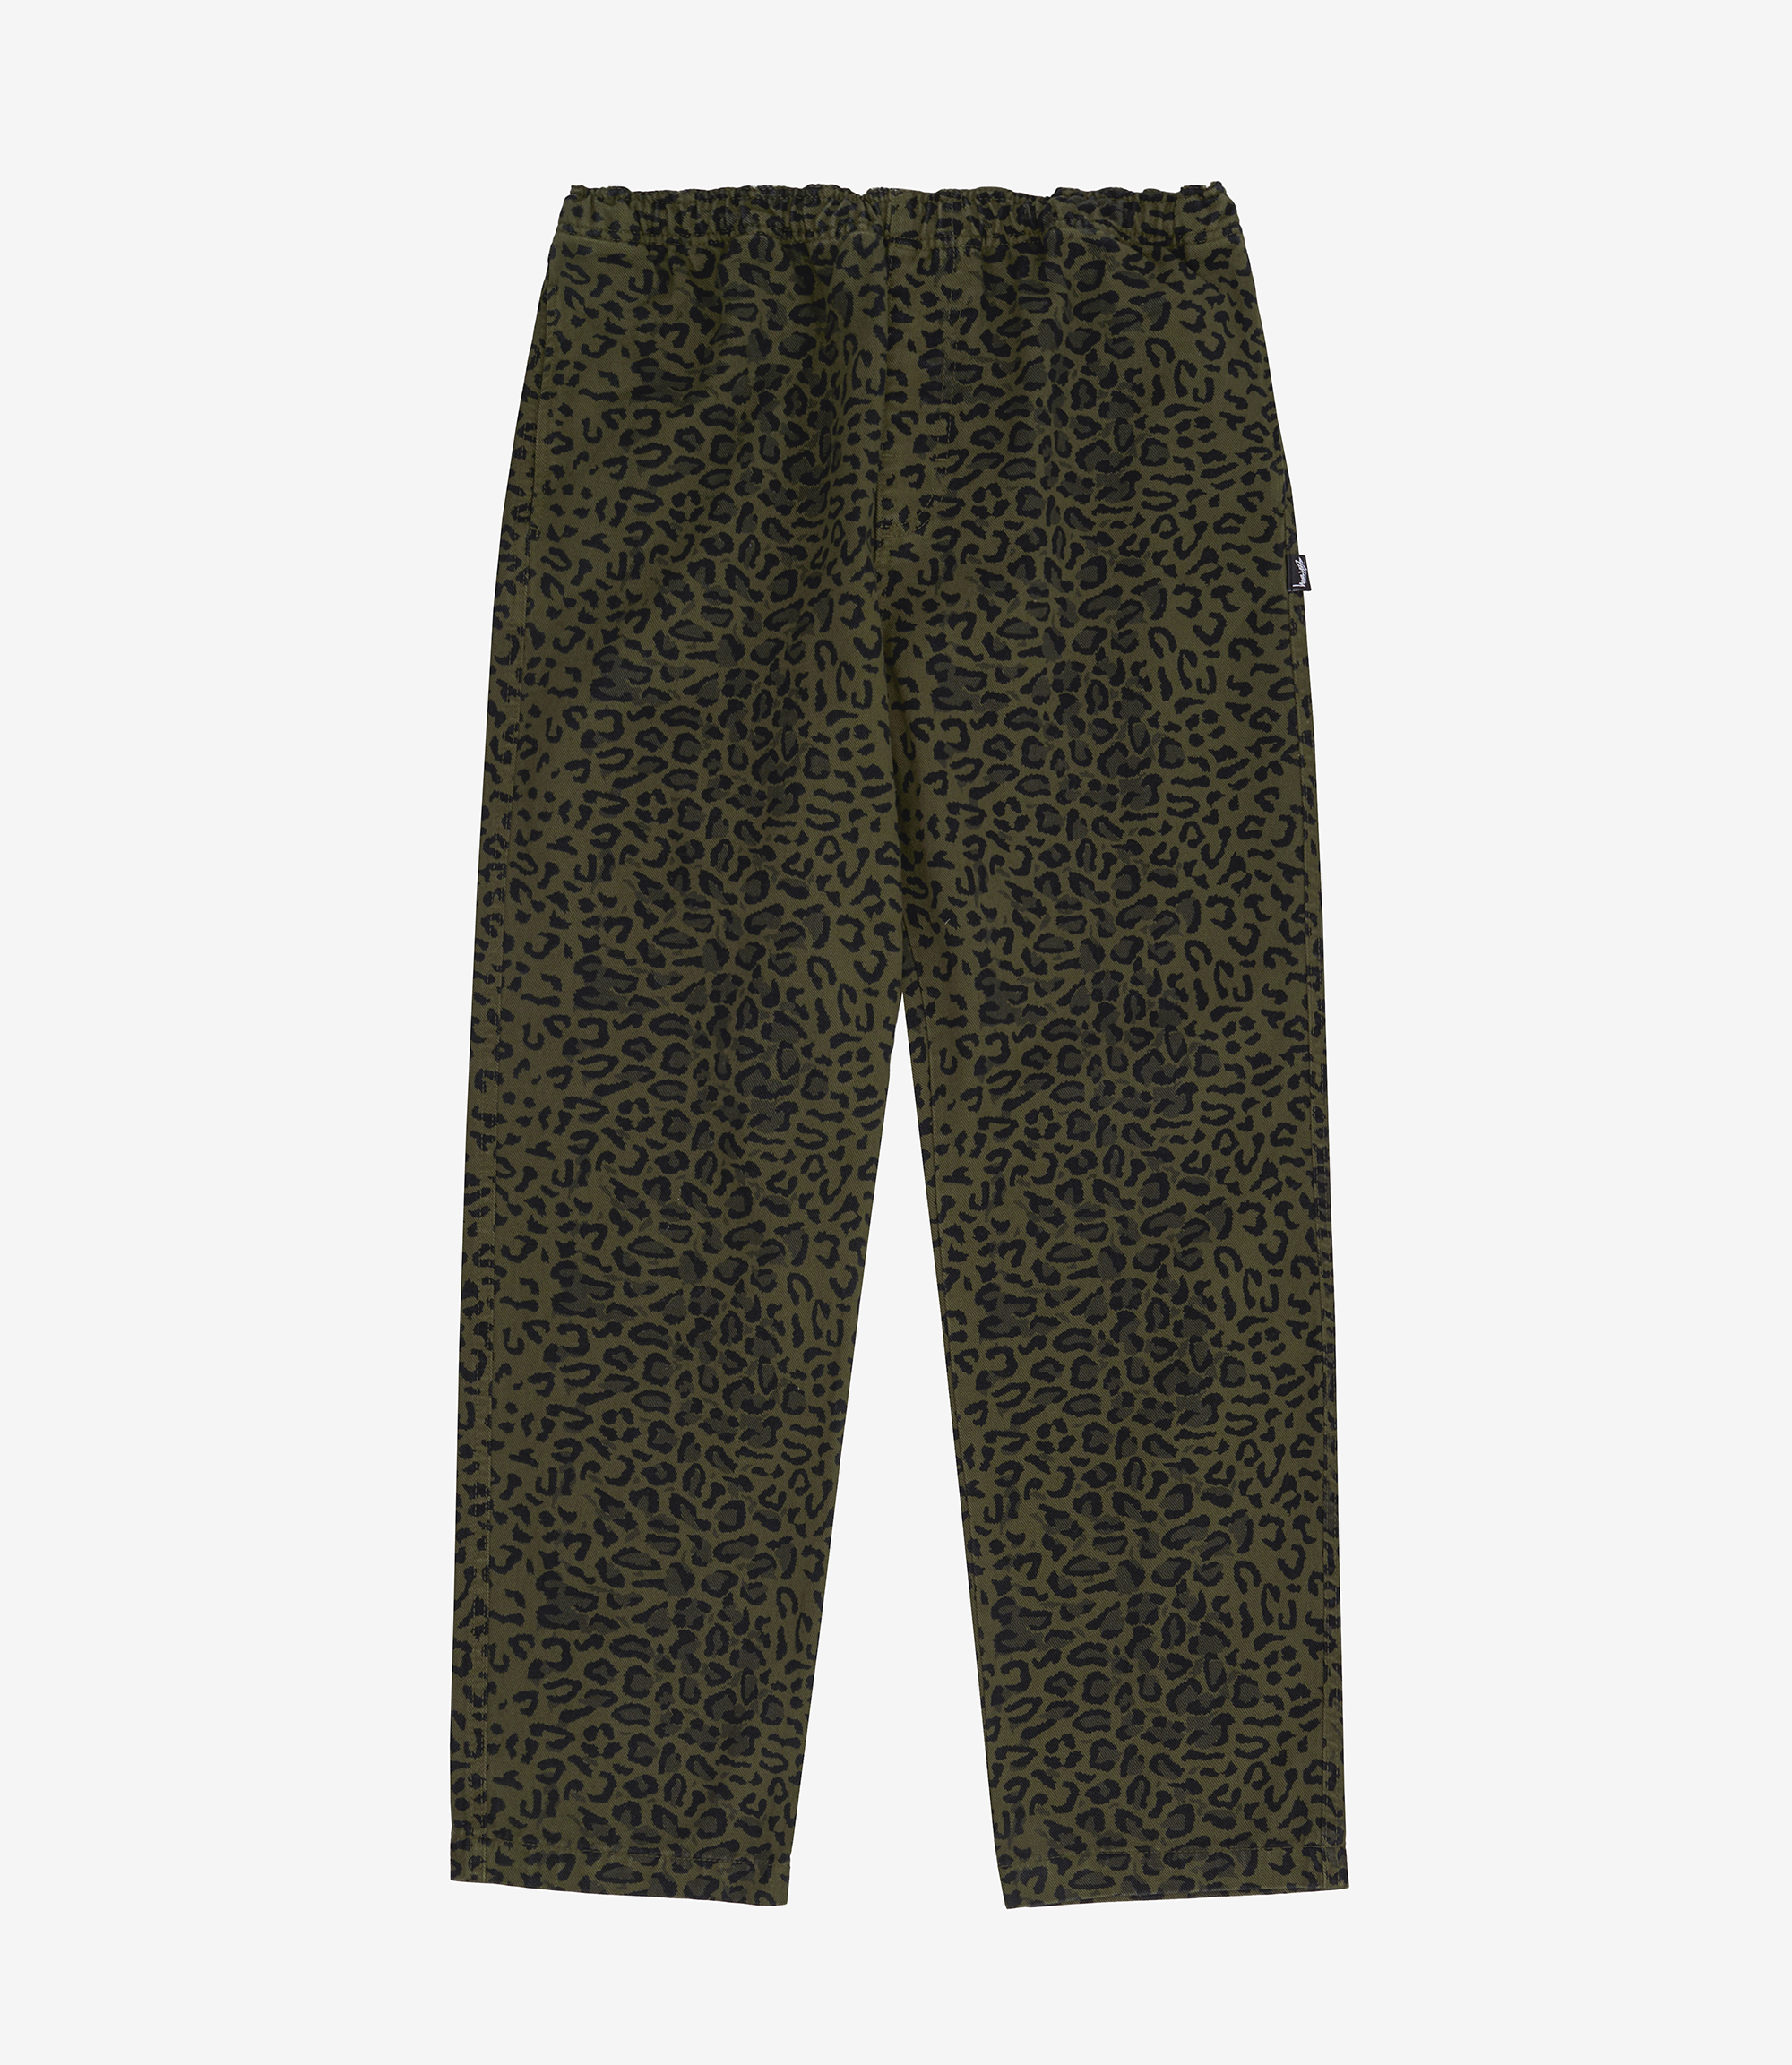 Shop Stussy Leopard Beach Pant Olive at itk online store